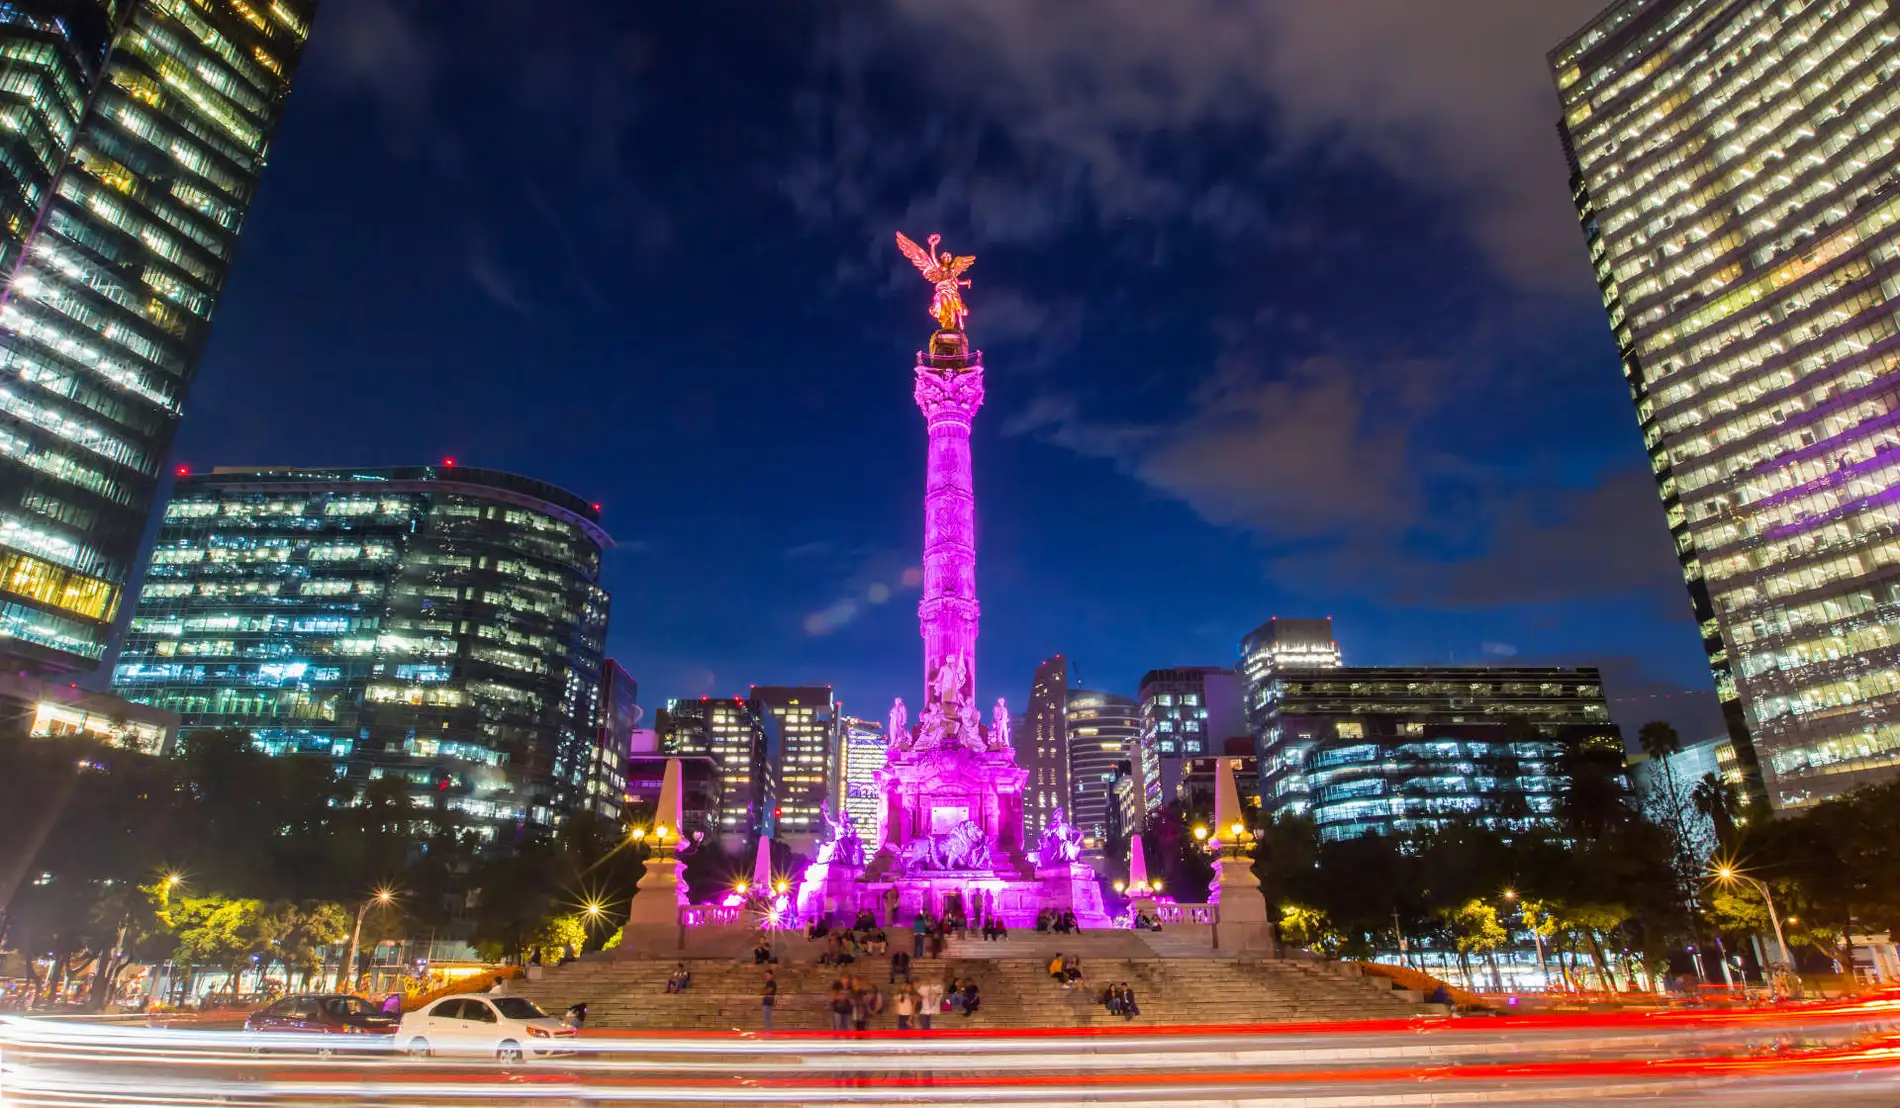 24 Hours in Mexico City